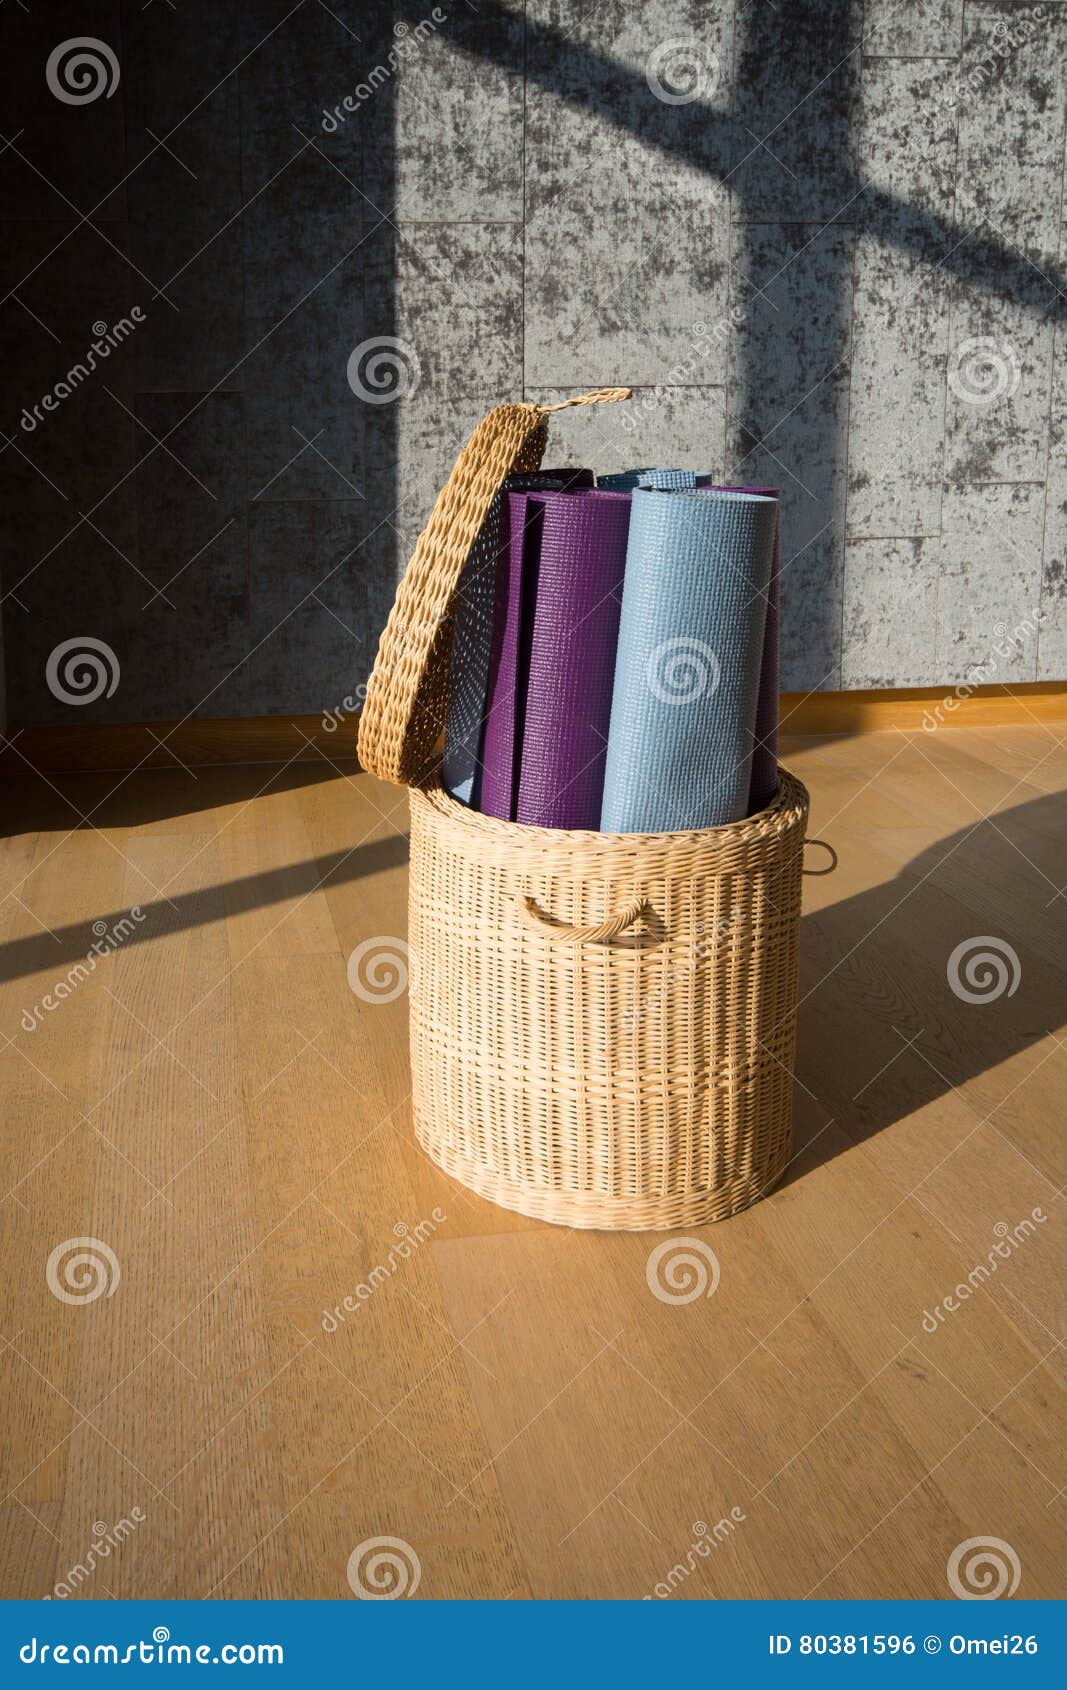 Yoga mat in the basket stock photo. Image of three, parquet - 80381596